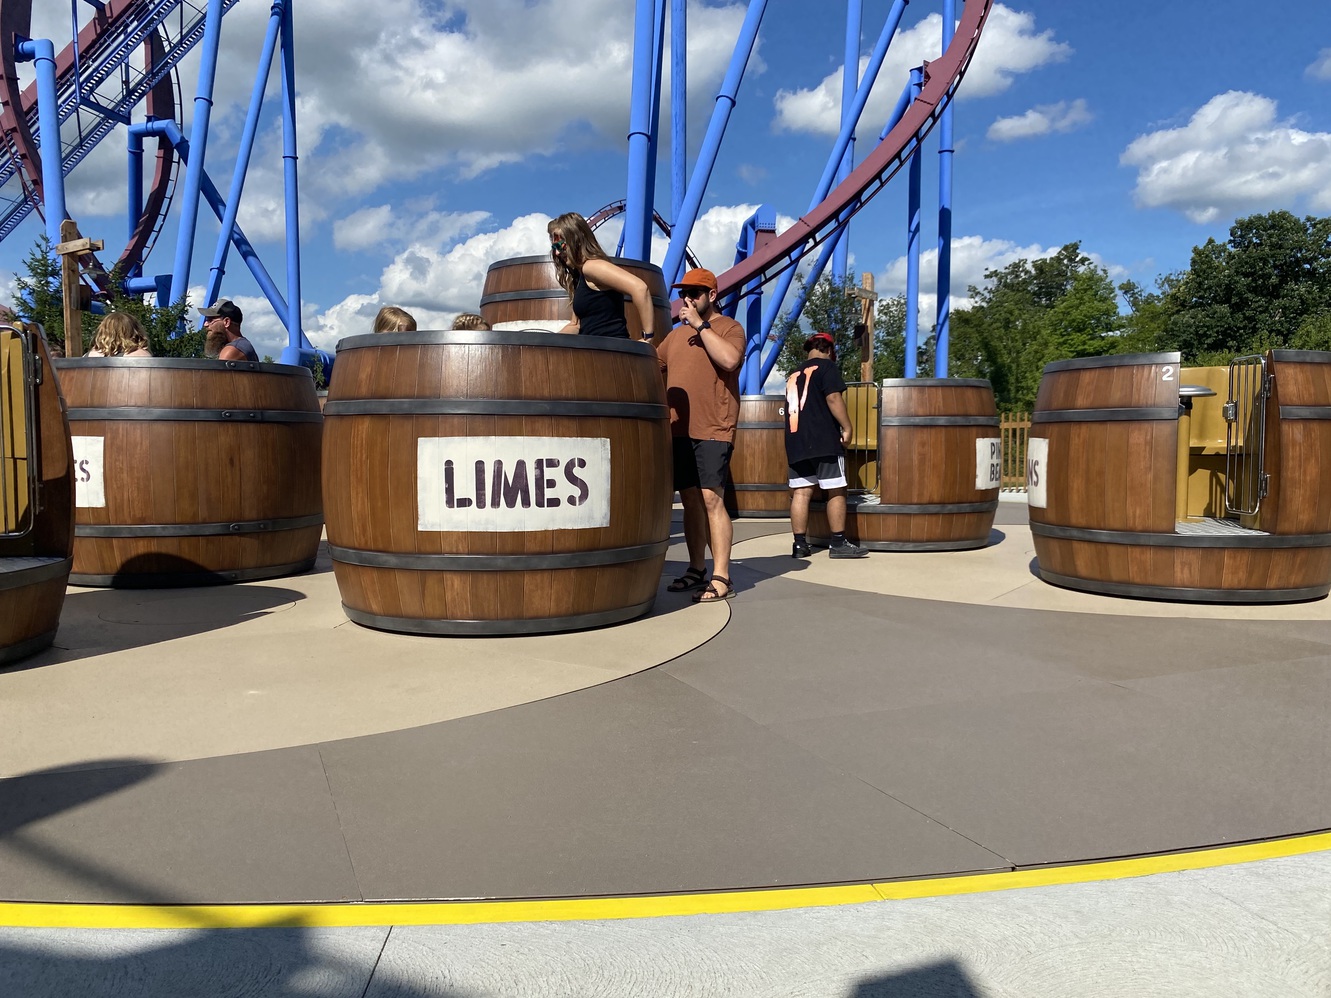 There
      are lots of fun "cargo" barrels to choose from to ride
      in.